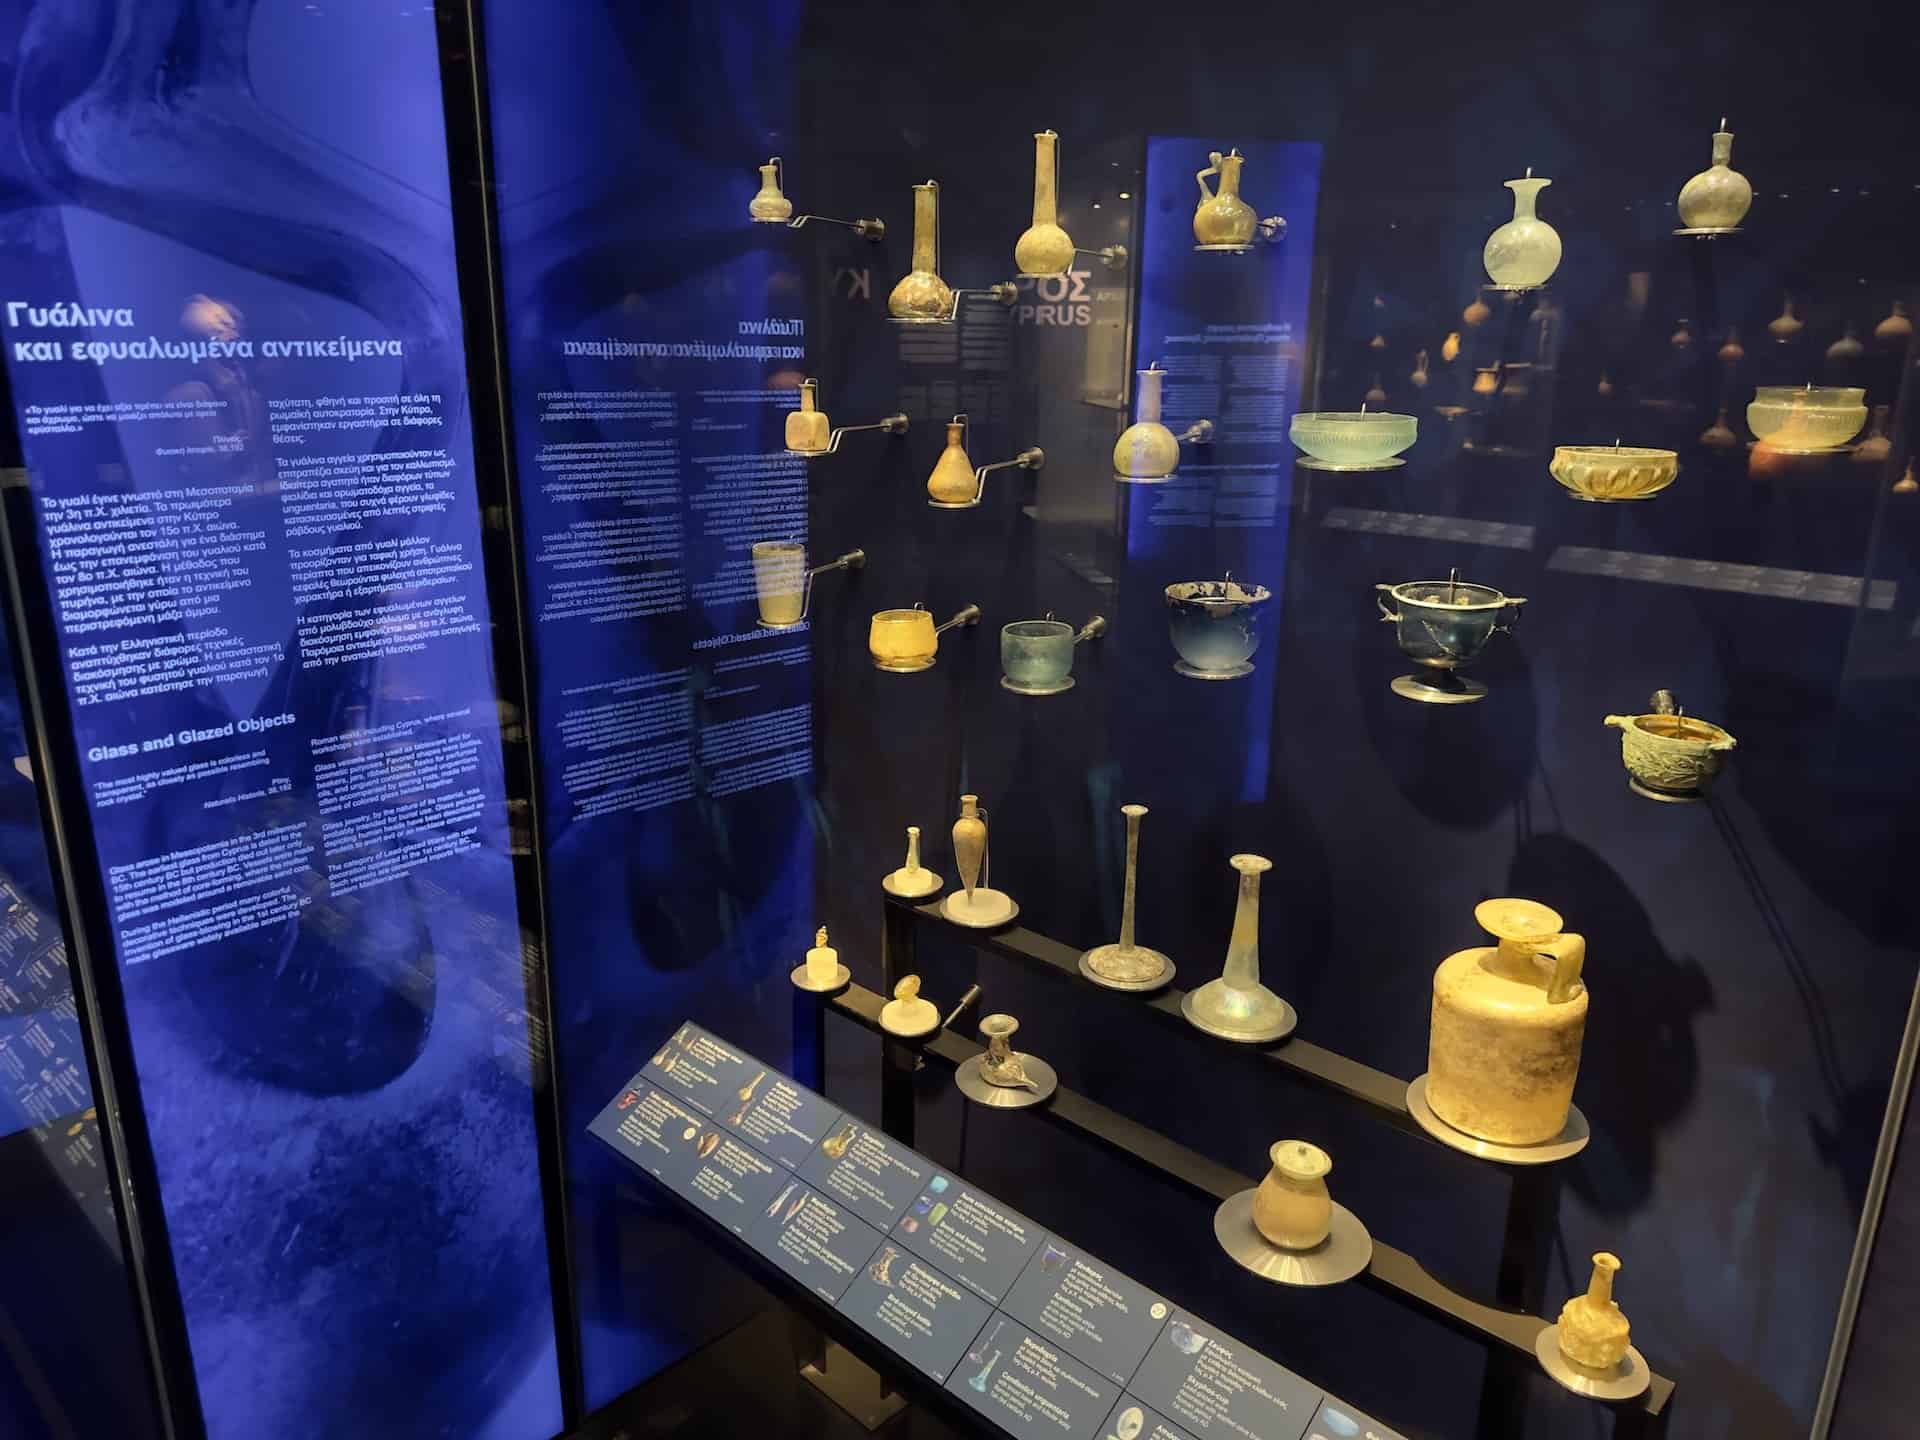 Glass and glazed objects in Cypriot Culture at the Museum of Cycladic Art in Athens, Greece